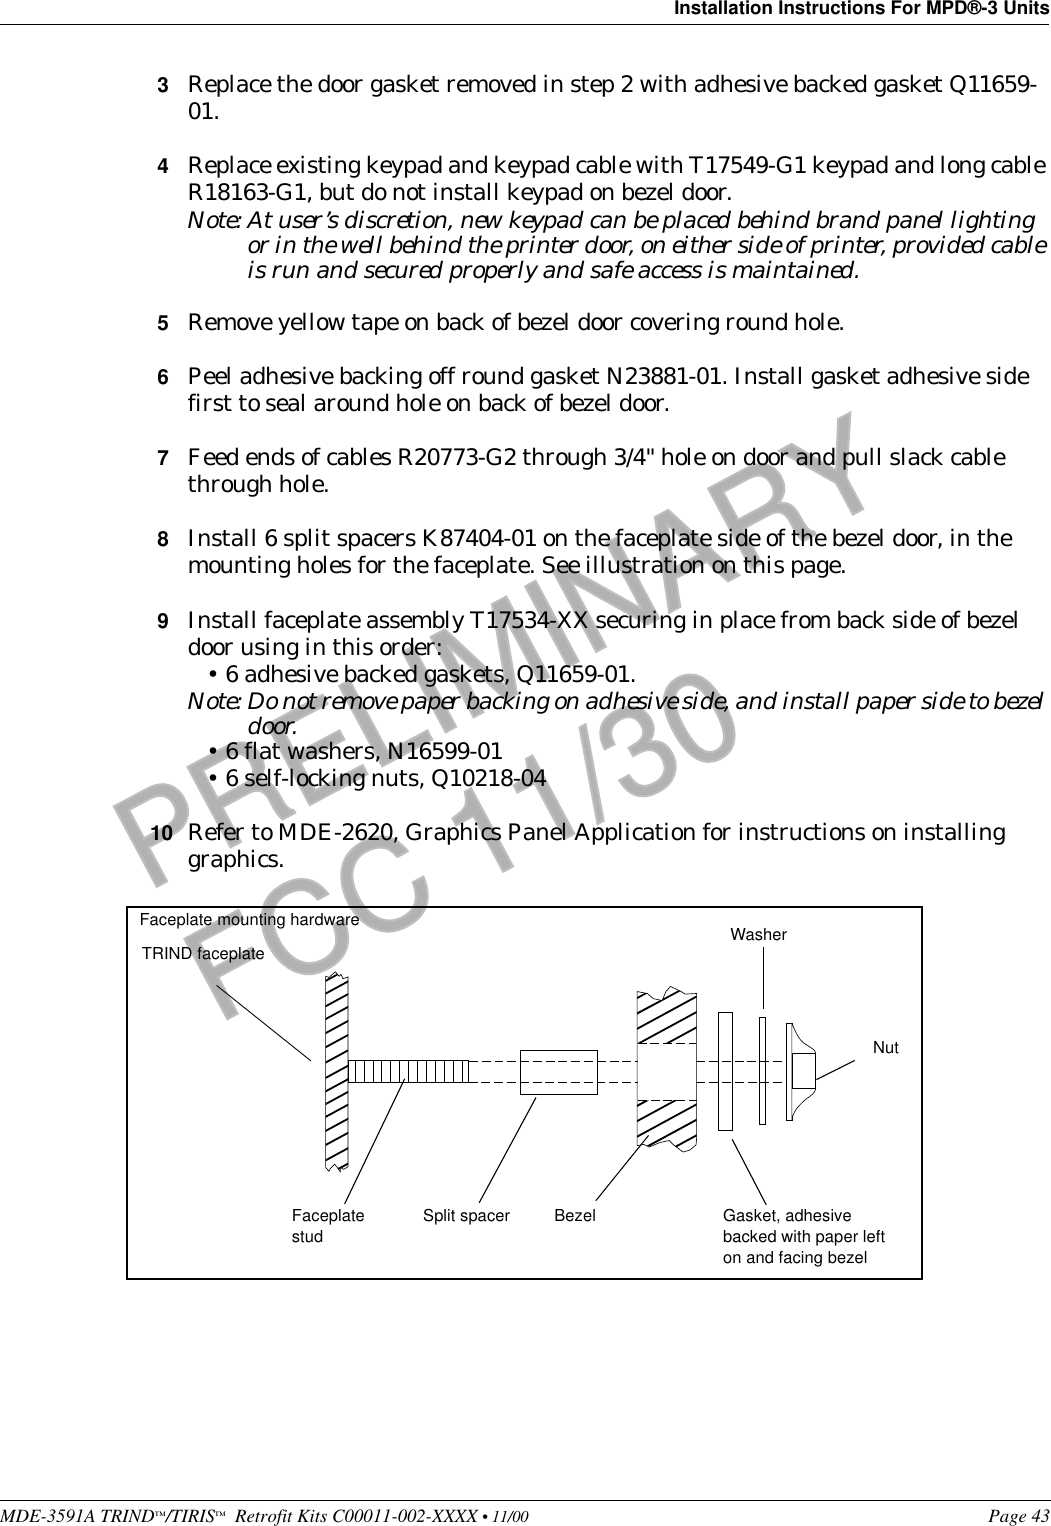 MDE-3591A TRIND™/TIRIS™  Retrofit Kits C00011-002-XXXX • 11/00 Page 43Installation Instructions For MPD®-3 UnitsPRELIMINARYFCC 11/303Replace the door gasket removed in step 2 with adhesive backed gasket Q11659-01.4Replace existing keypad and keypad cable with T17549-G1 keypad and long cable R18163-G1, but do not install keypad on bezel door.Note: At user’s discretion, new keypad can be placed behind brand panel lighting or in the well behind the printer door, on either side of printer, provided cable is run and secured properly and safe access is maintained.5Remove yellow tape on back of bezel door covering round hole.6Peel adhesive backing off round gasket N23881-01. Install gasket adhesive side first to seal around hole on back of bezel door.7Feed ends of cables R20773-G2 through 3/4&quot; hole on door and pull slack cable through hole.8Install 6 split spacers K87404-01 on the faceplate side of the bezel door, in the mounting holes for the faceplate. See illustration on this page.9Install faceplate assembly T17534-XX securing in place from back side of bezel door using in this order:•6 adhesive backed gaskets, Q11659-01.Note: Do not remove paper backing on adhesive side, and install paper side to bezel door.•6 flat washers, N16599-01•6 self-locking nuts, Q10218-0410 Refer to MDE-2620, Graphics Panel Application for instructions on installing graphics. TRIND faceplateBezelFaceplate studSplit spacer Gasket, adhesive backed with paper left on and facing bezelWasherNutFaceplate mounting hardware